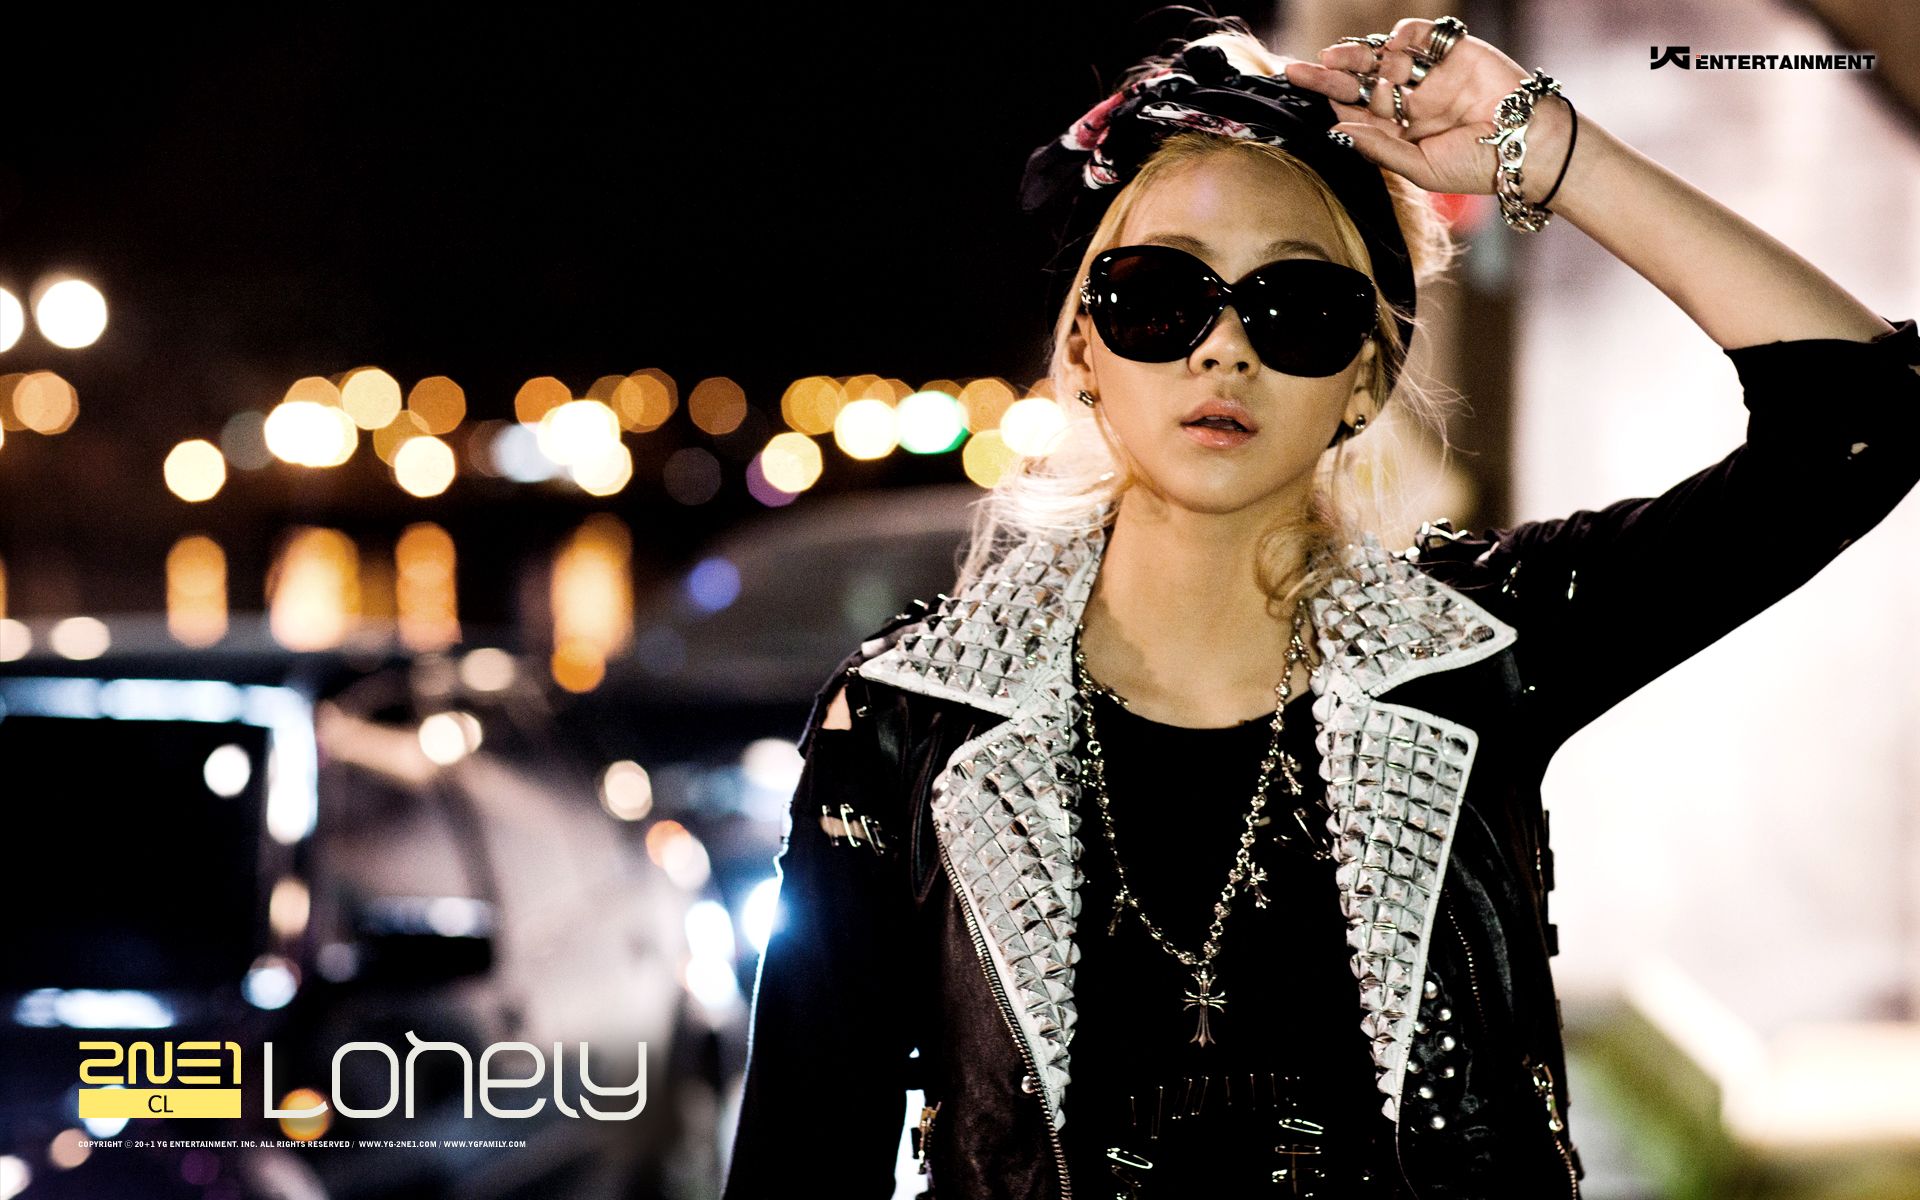 Photos Official 2NE1 Lonely Wallpaper (May 2011) « CL The Baddest Female